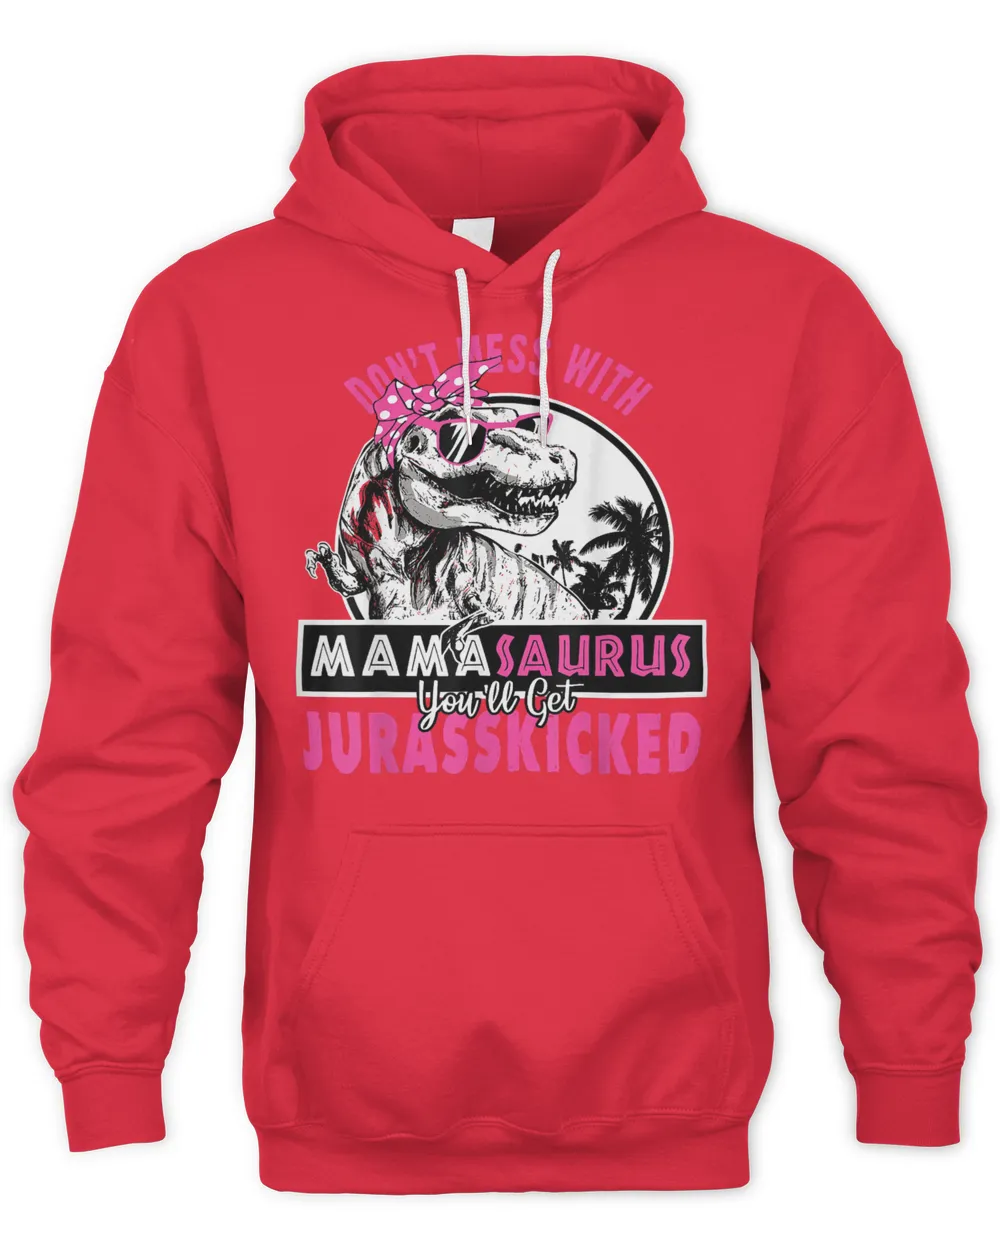 Don't mess with Mamasaurus you'll get Jurasskicked T-Shirt